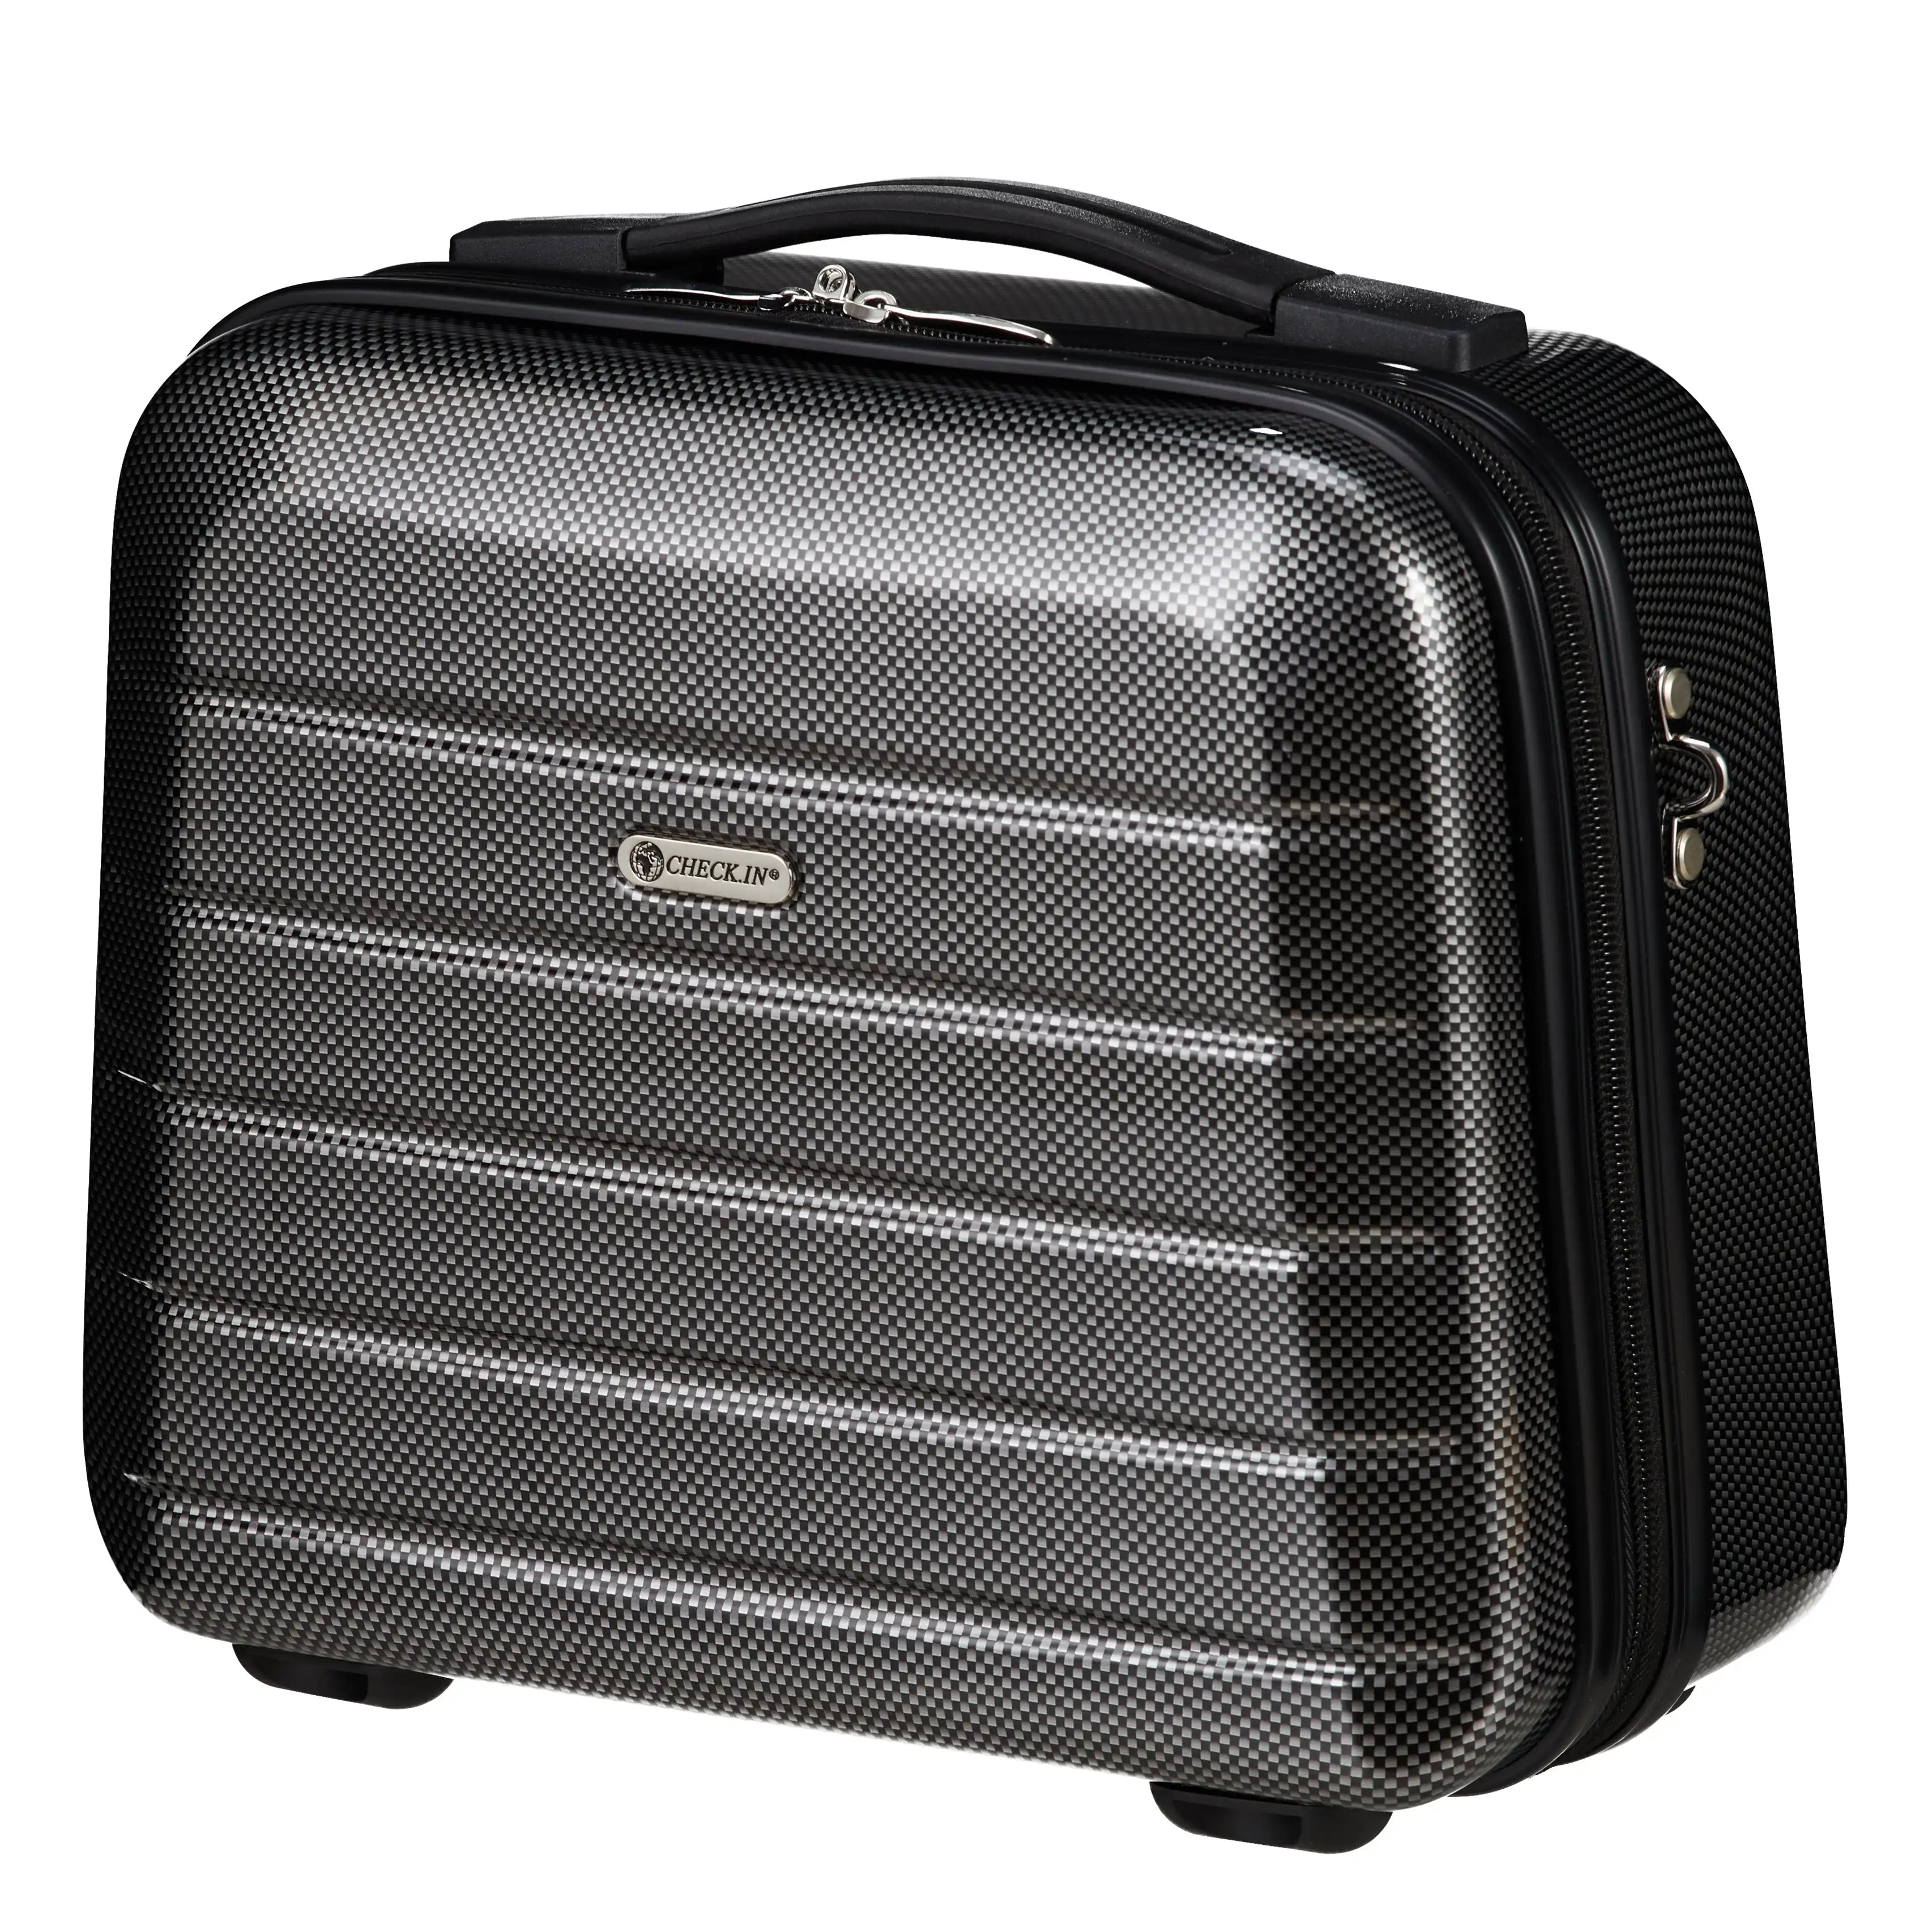 Check In London 2.0 Cosmetic Case 33 cm - Carbon Black